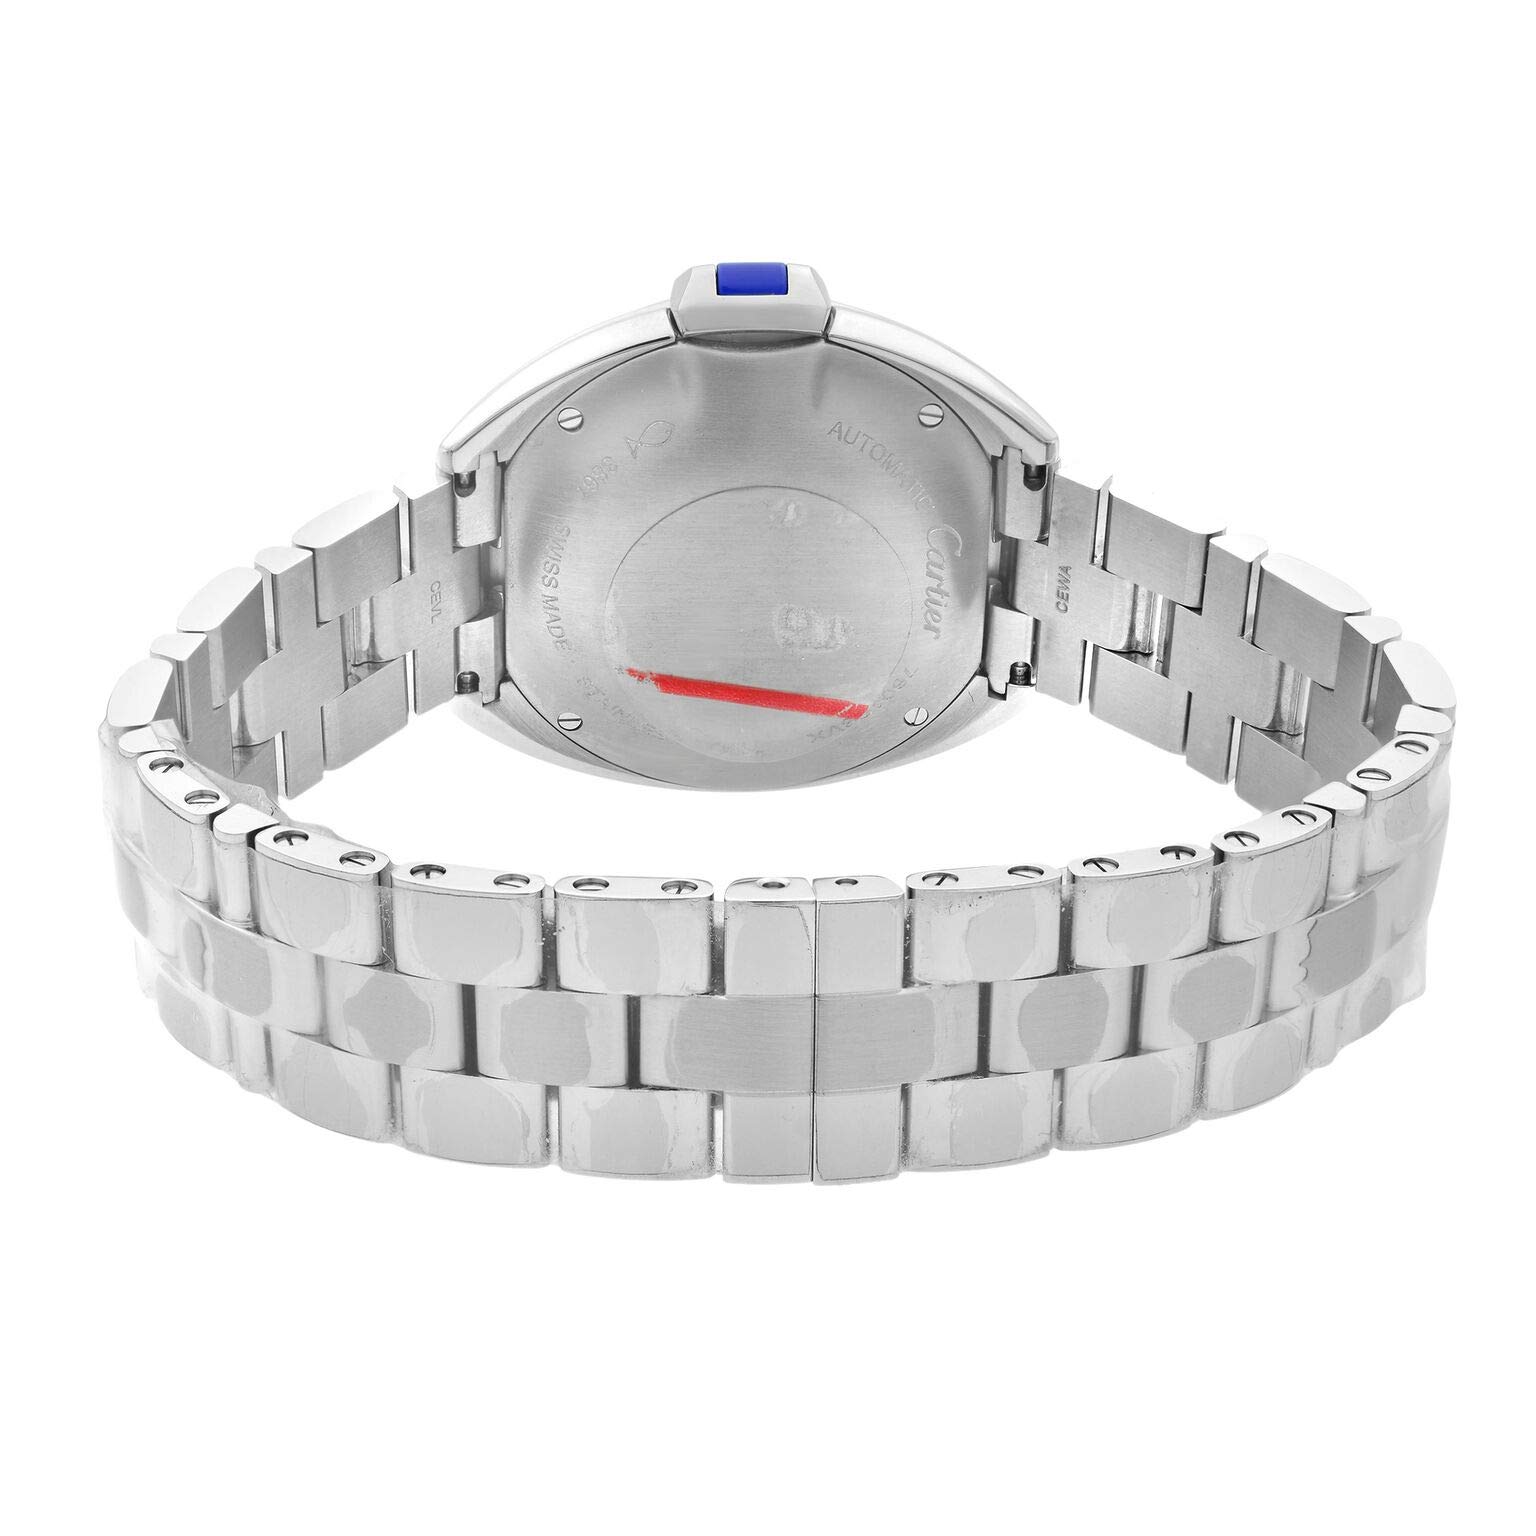 Cartier Cle Automatic Ladies Watch WSCL0005